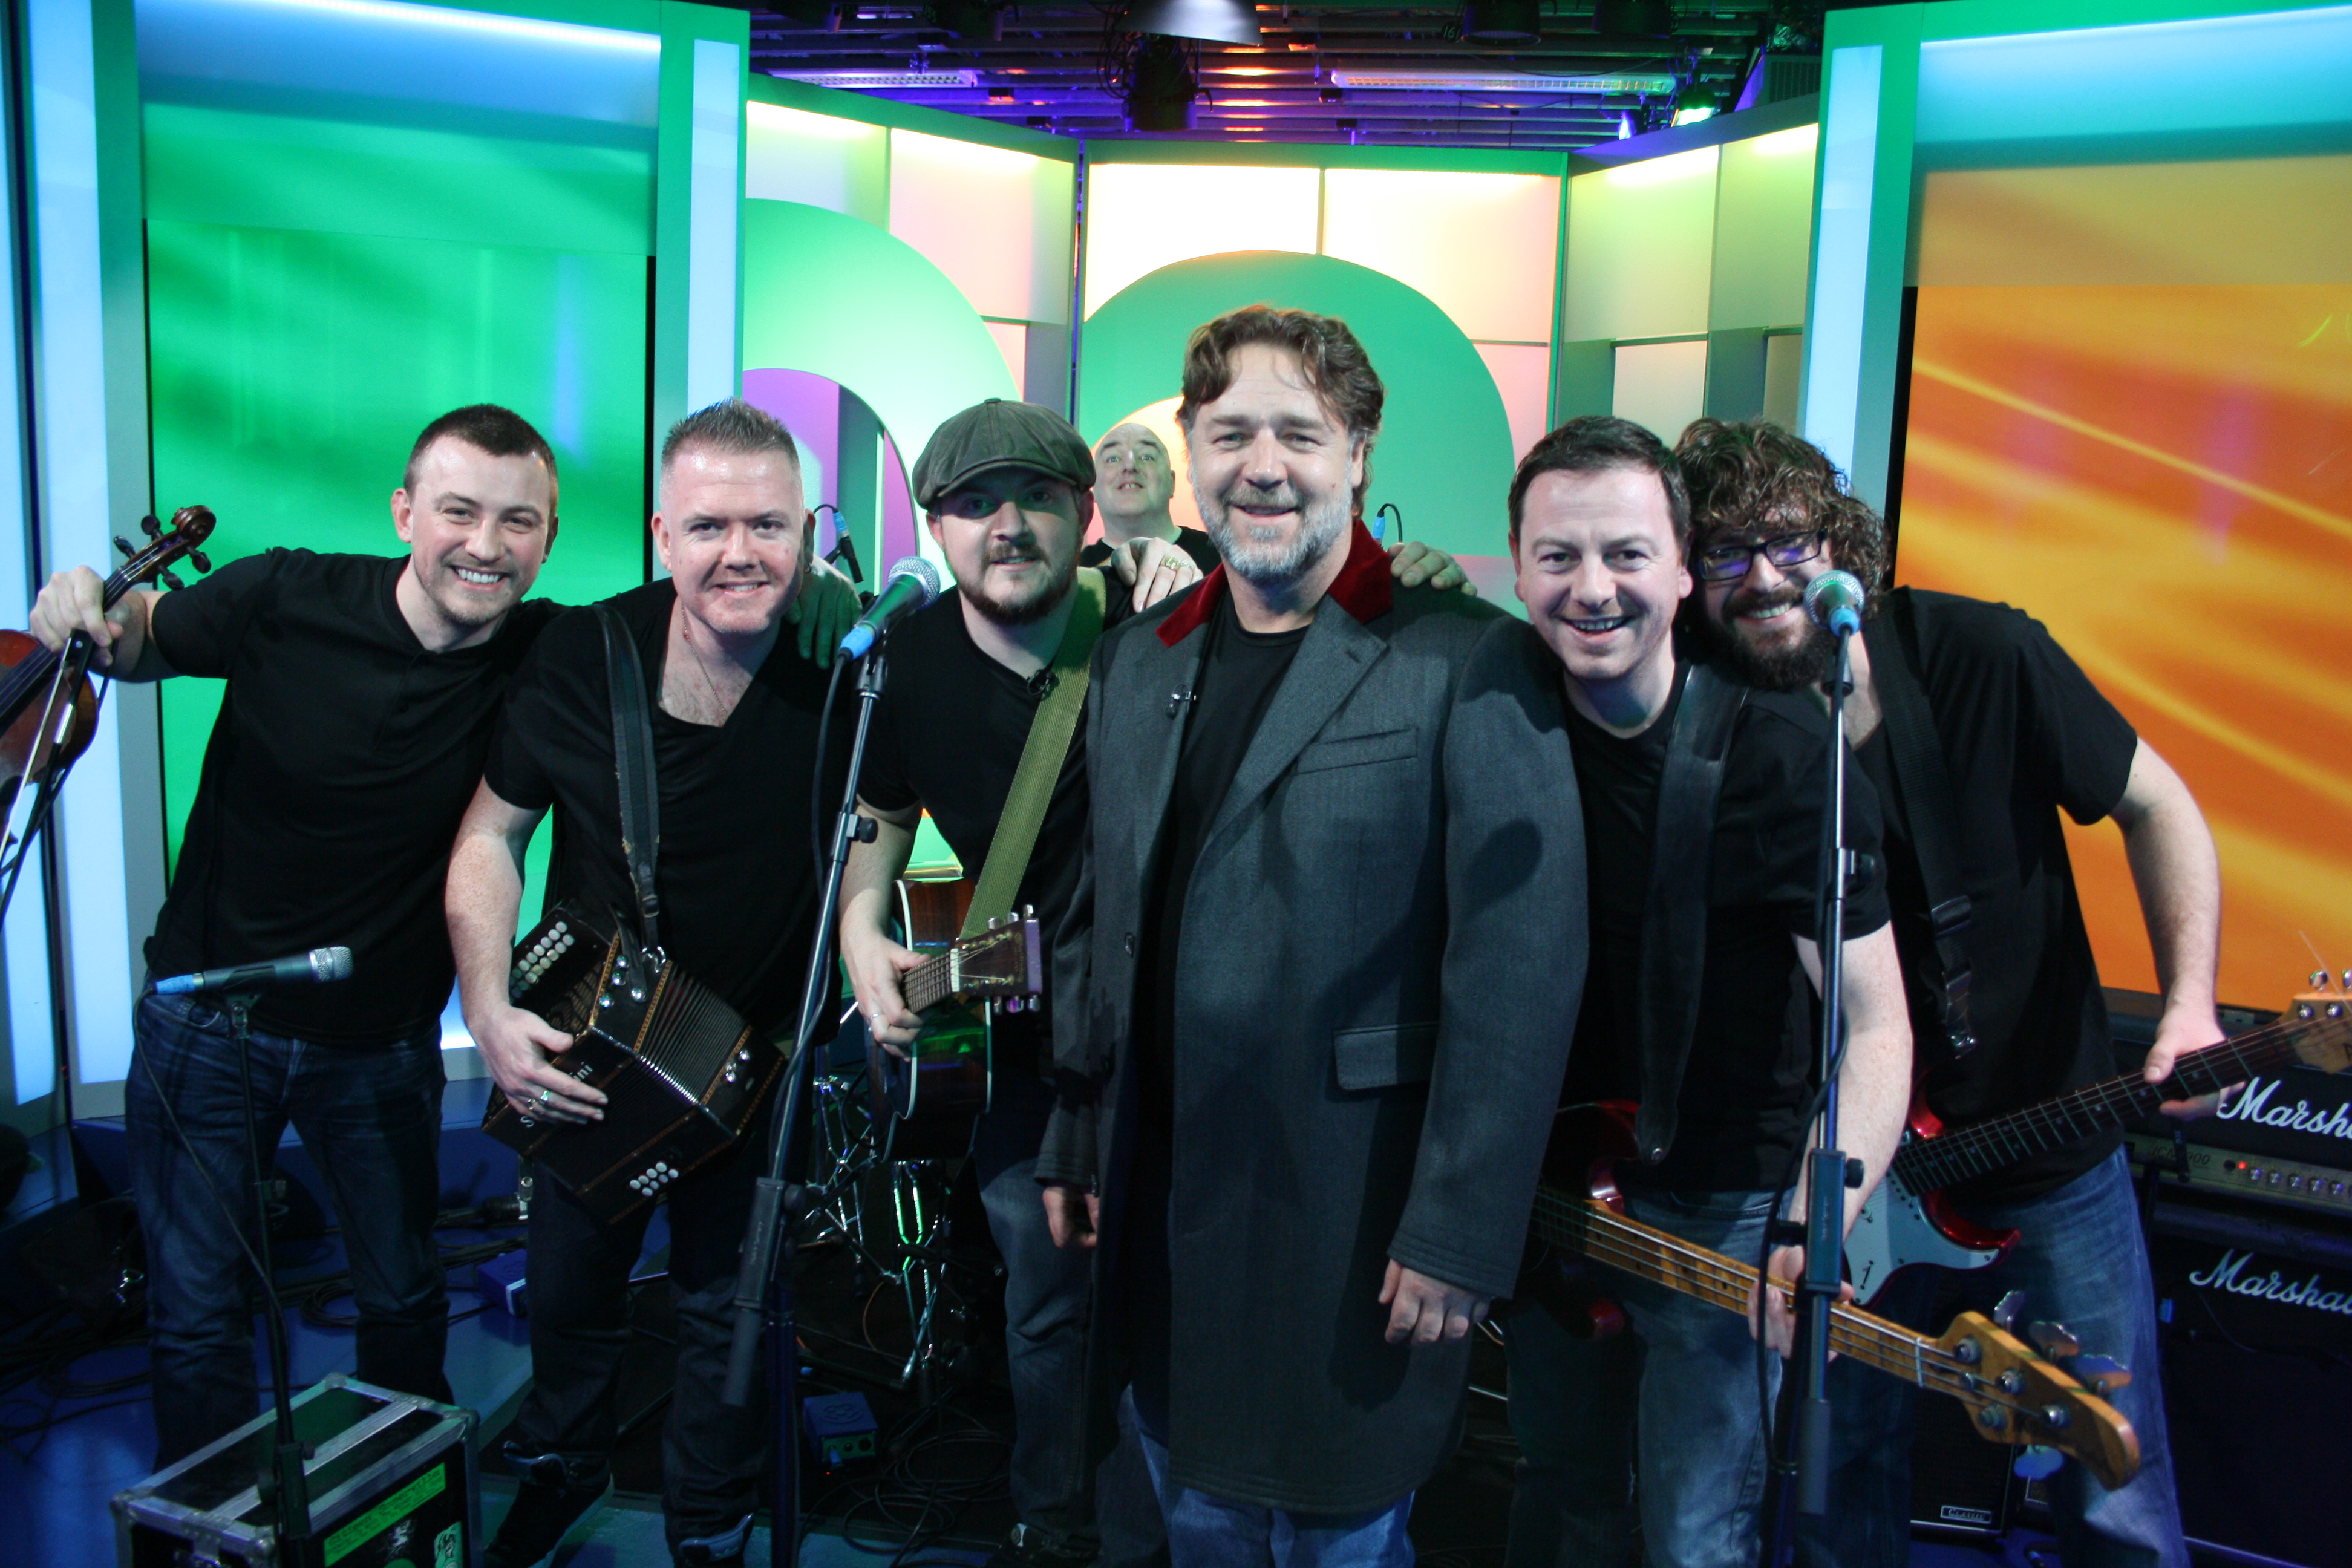 Andy's band The BibleCodeSundays with Russell Crowe after their performance on The One Show on BBC1 - St. Patrick's Day 2015